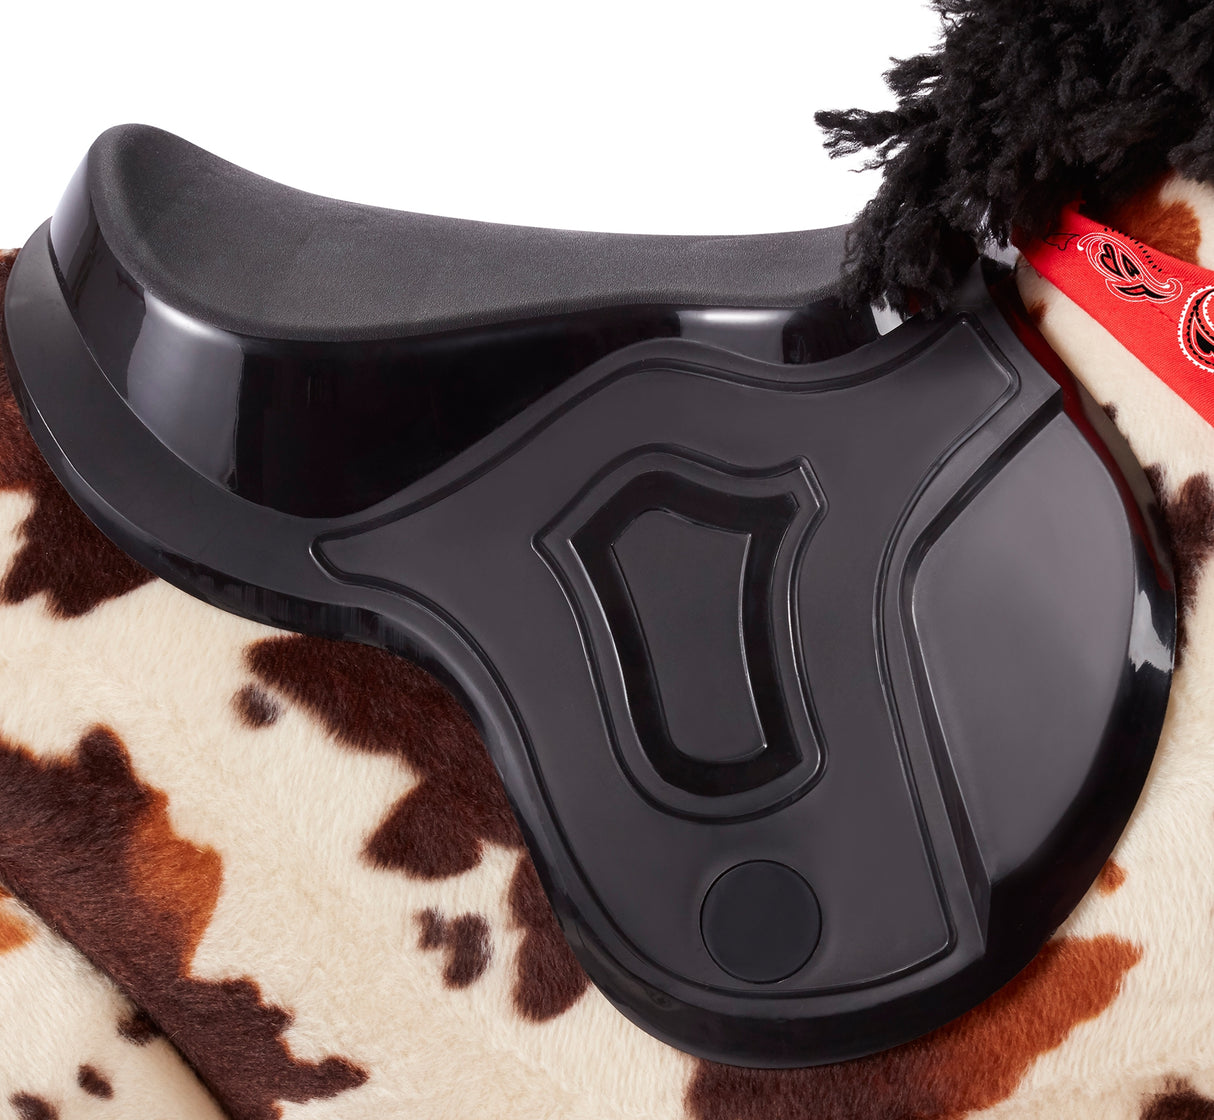 SADDLE TO KEEP YOU IN PLACE WHILE RIDING